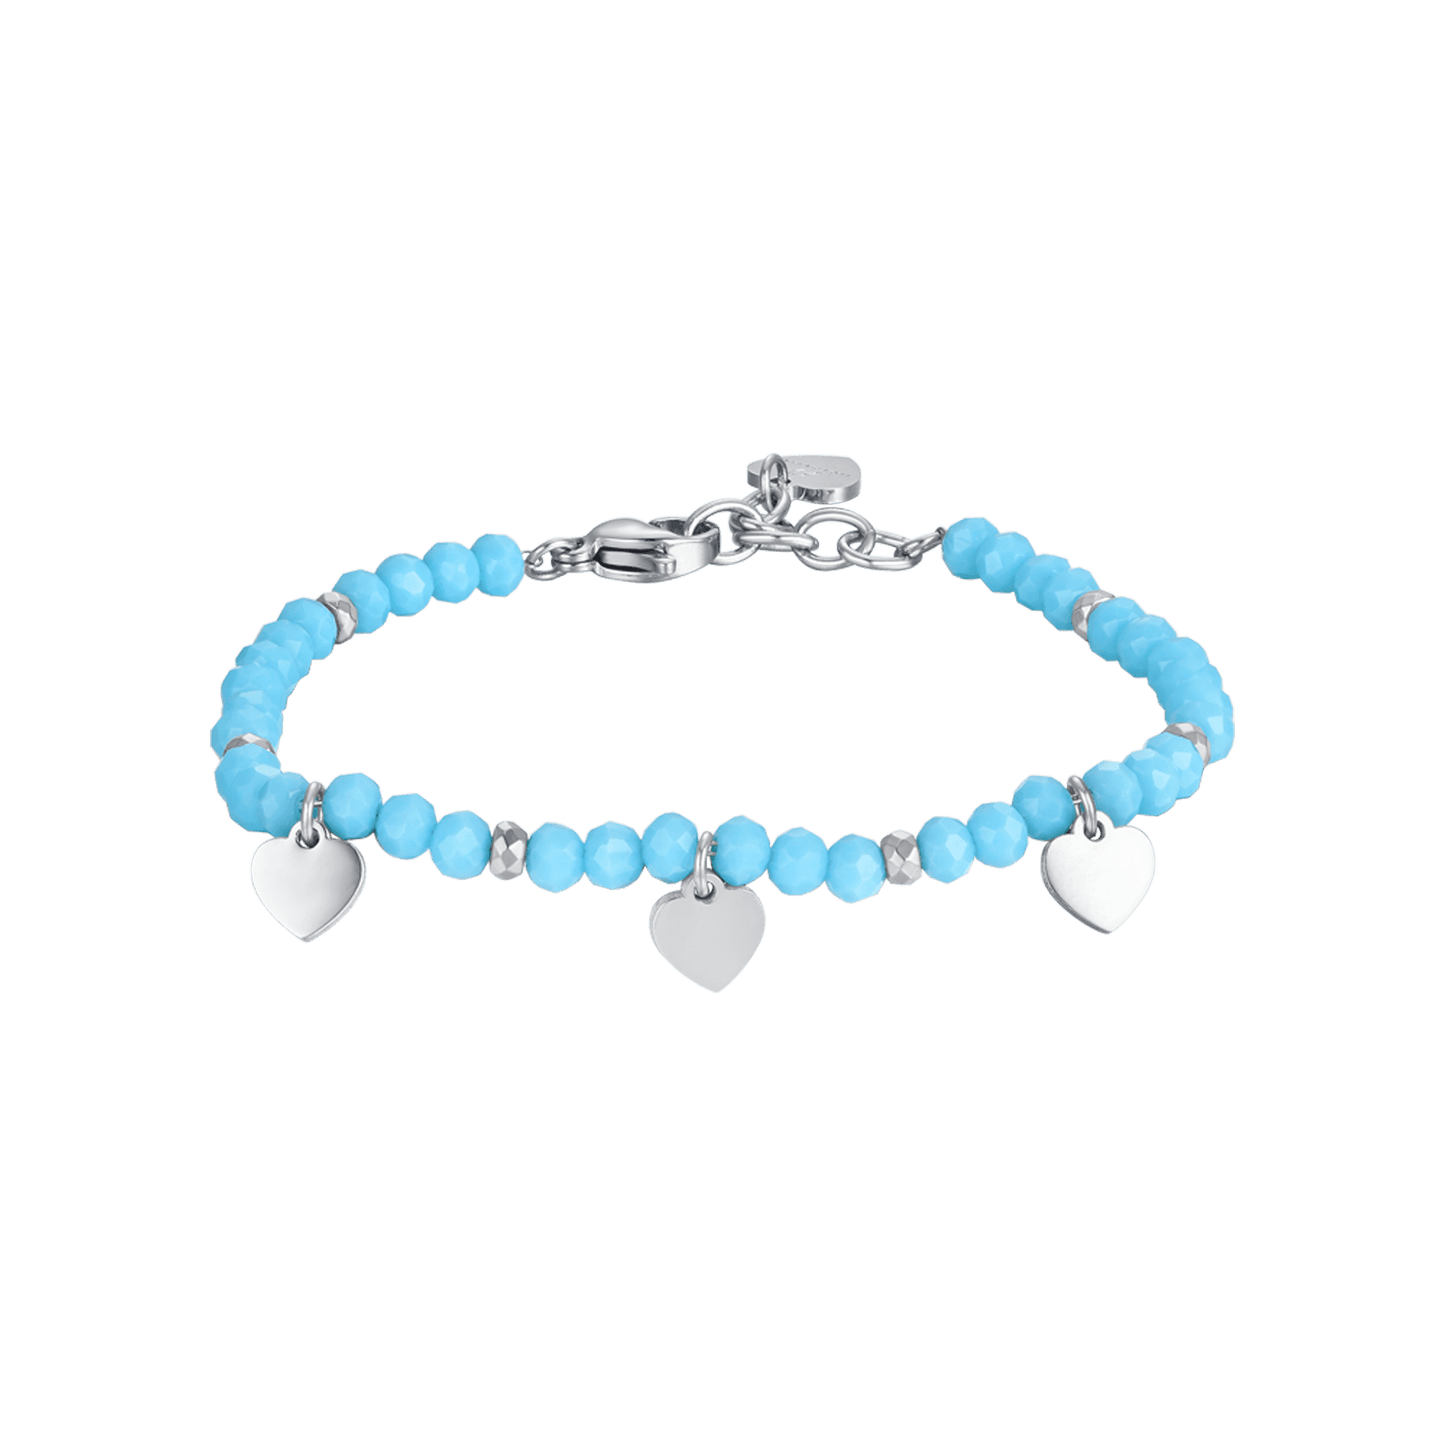 STEEL GIRL BRACELET WITH TURQUOISE STONES AND HEARTS